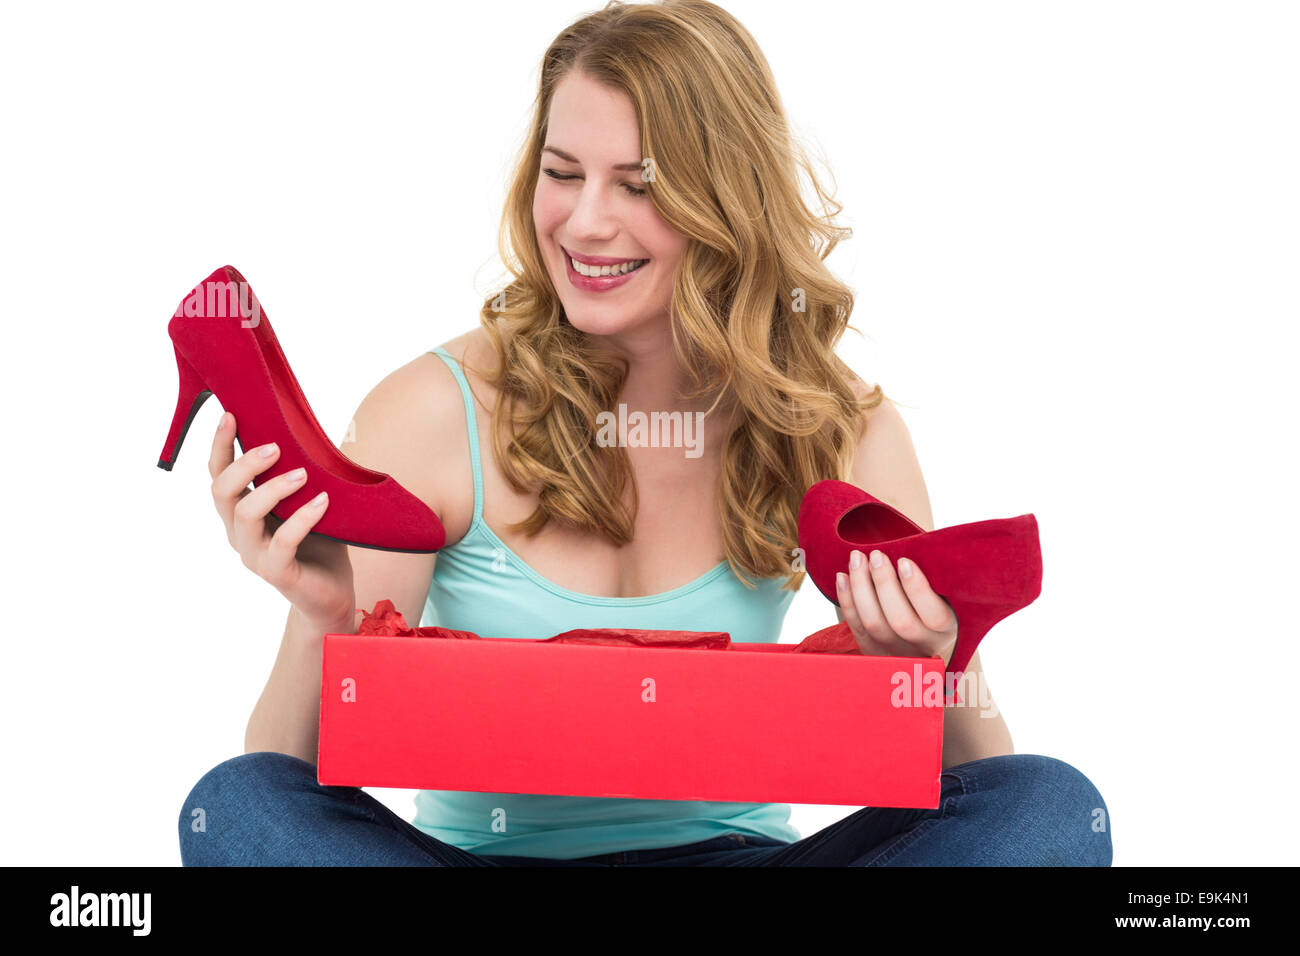 Blonde woman discovering shoes in a gift box Stock Photo